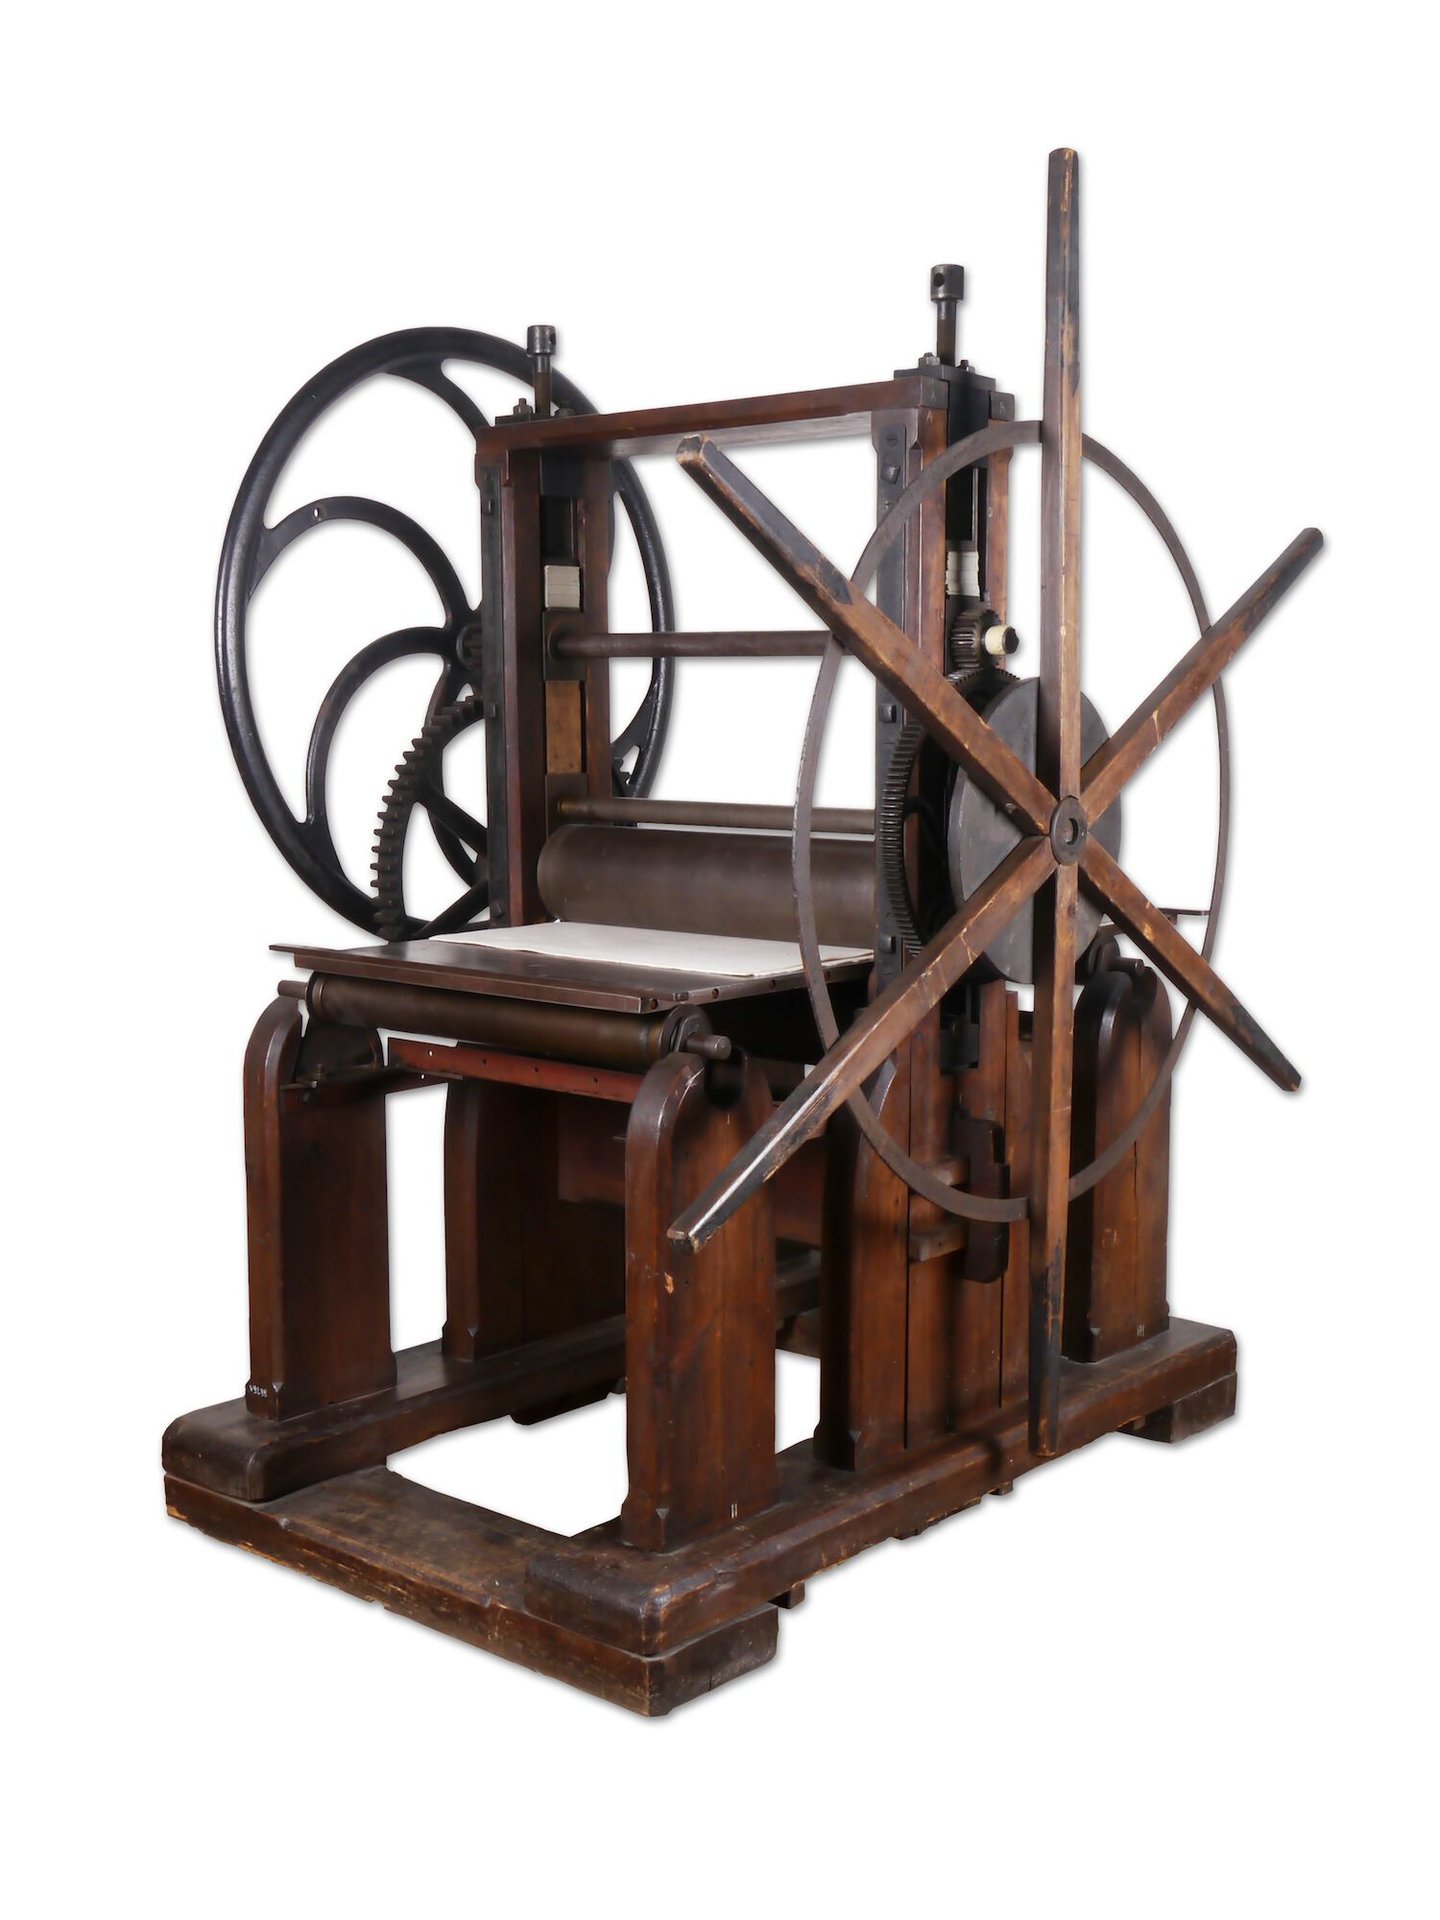 Etching press with a wooden frame